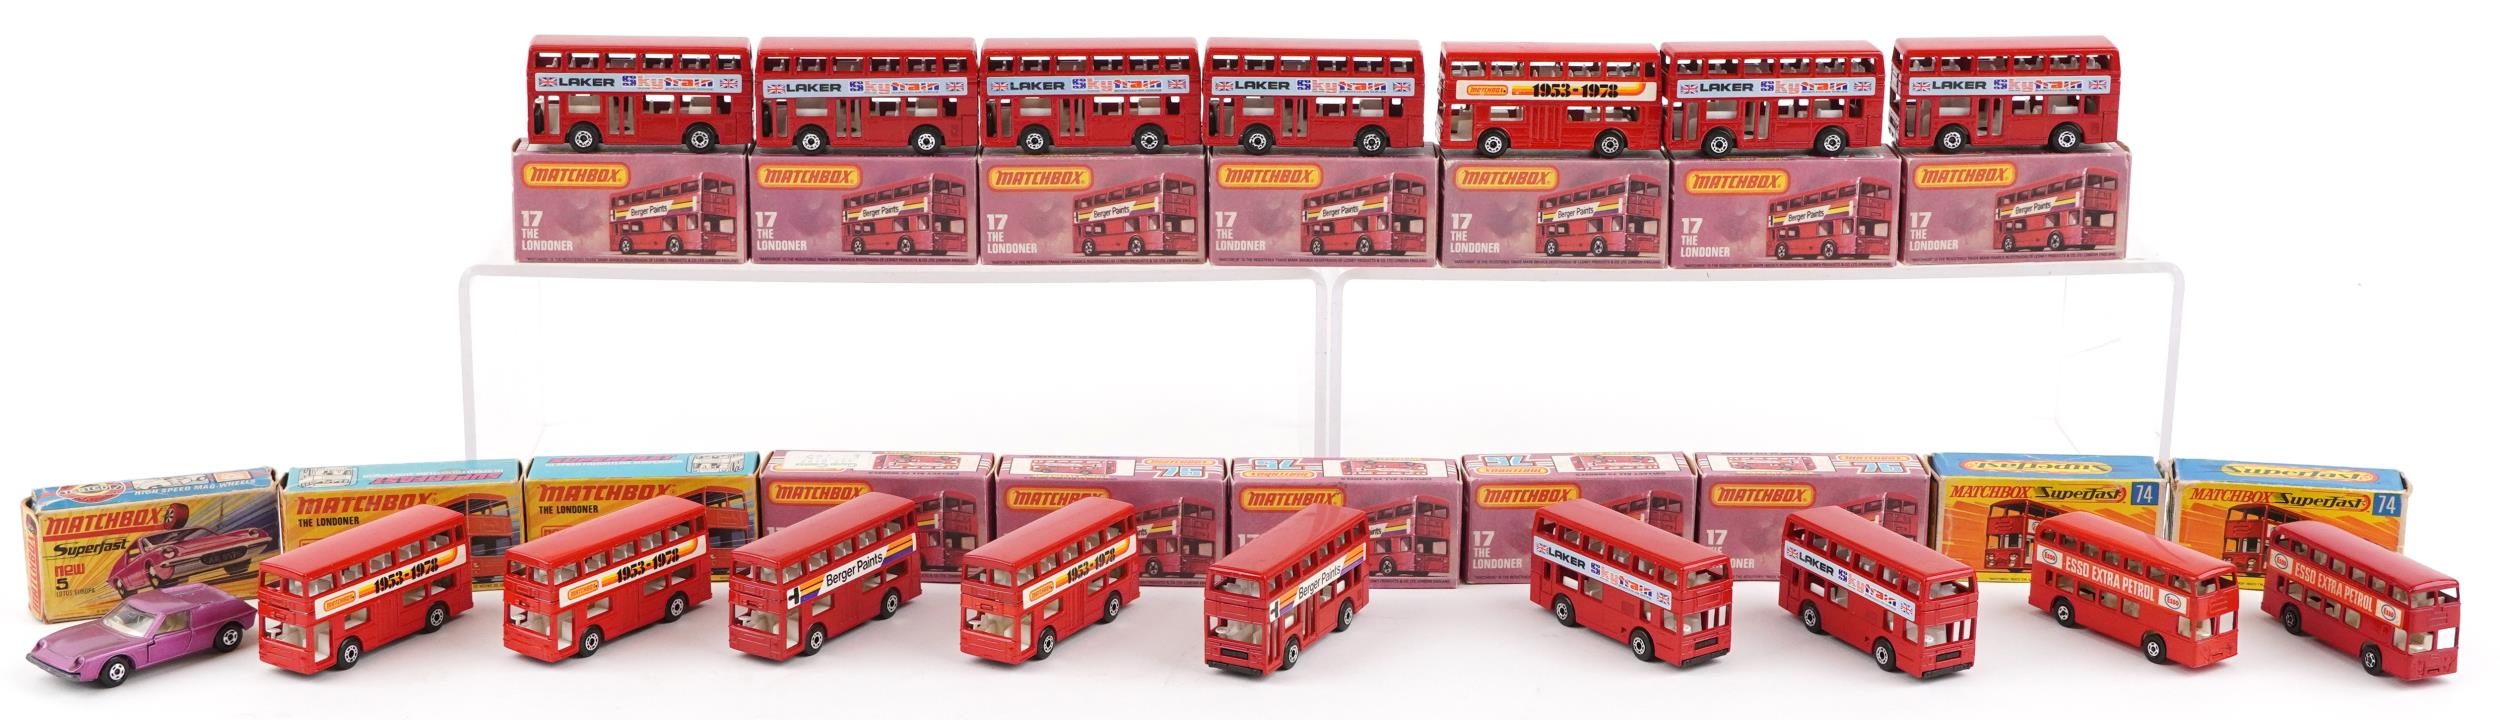 Seventeen vintage Matchbox diecast vehicles with boxes including sixteen Buses, numbers 17, 74 and 5